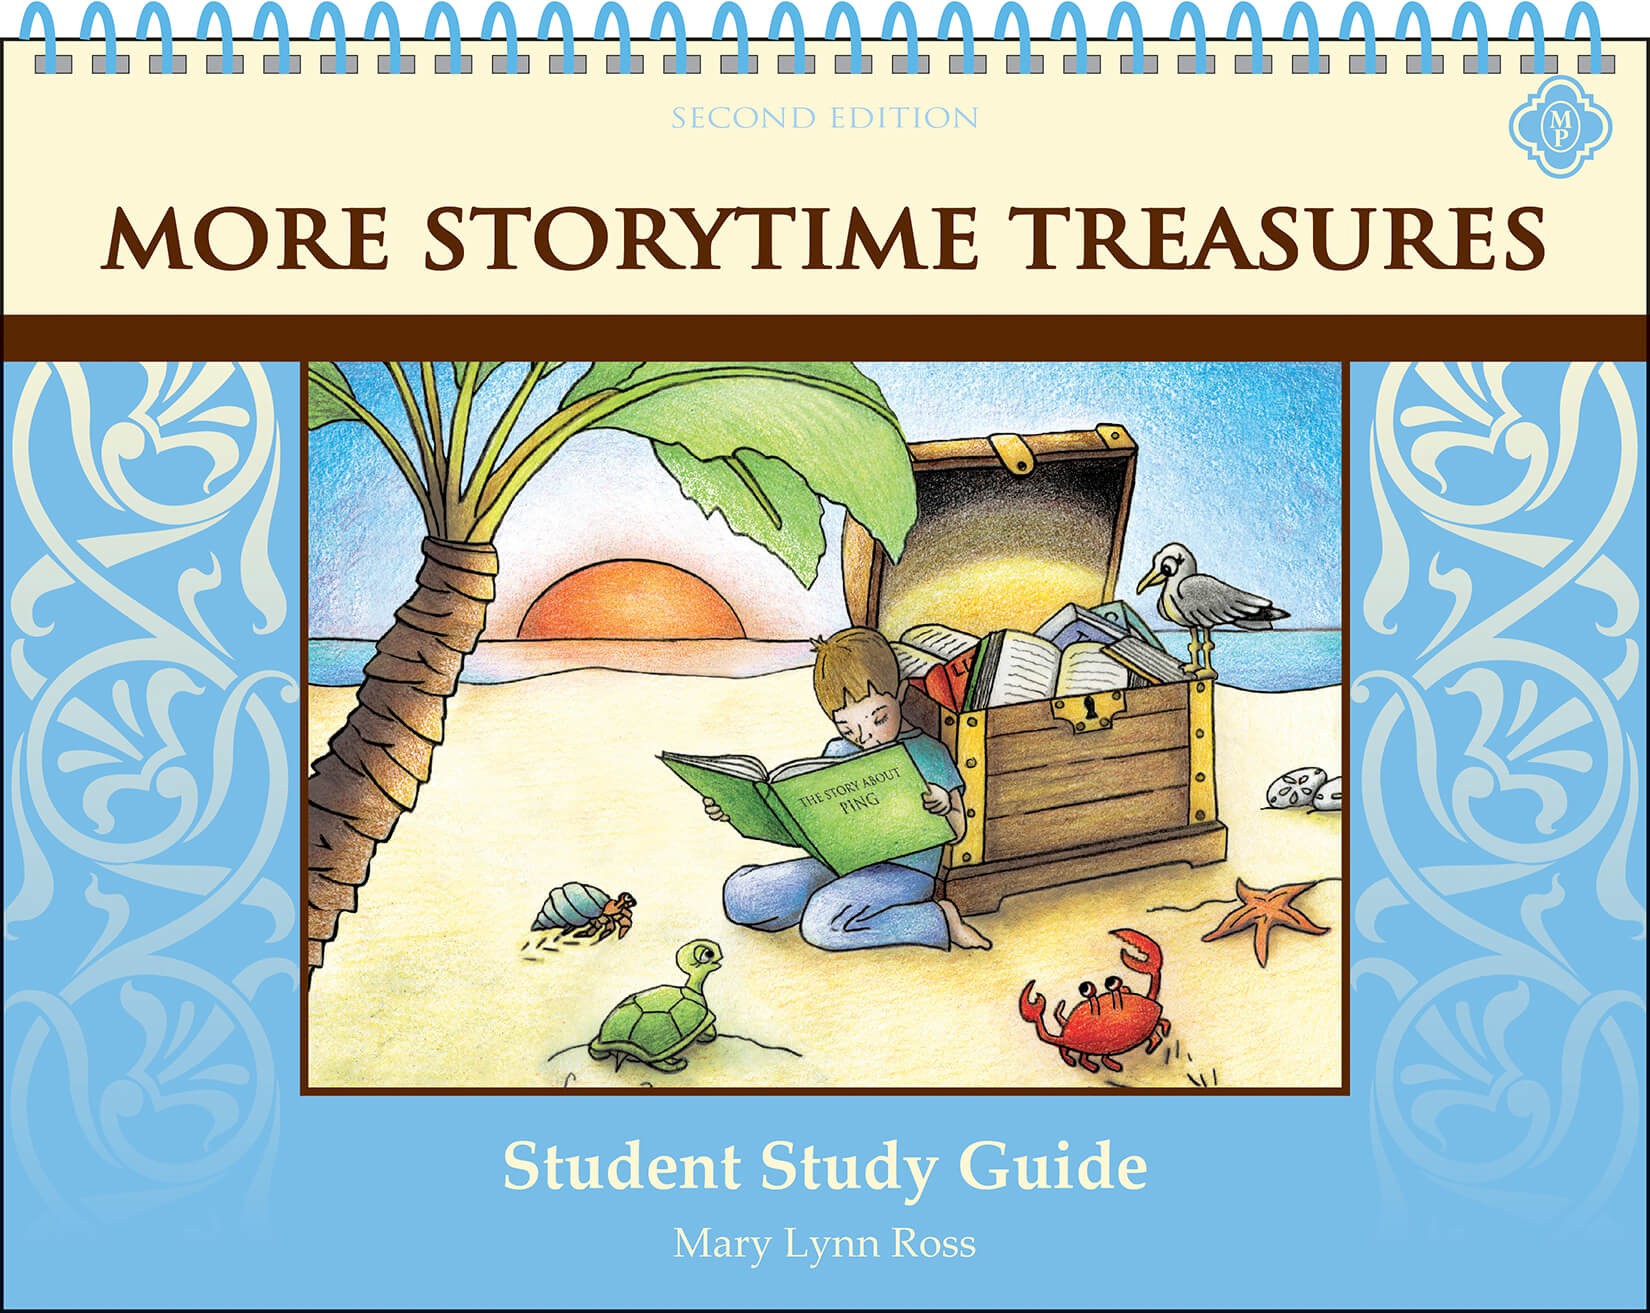 More StoryTime Treasures Student Study Guide, Second Edition- Memoria Press